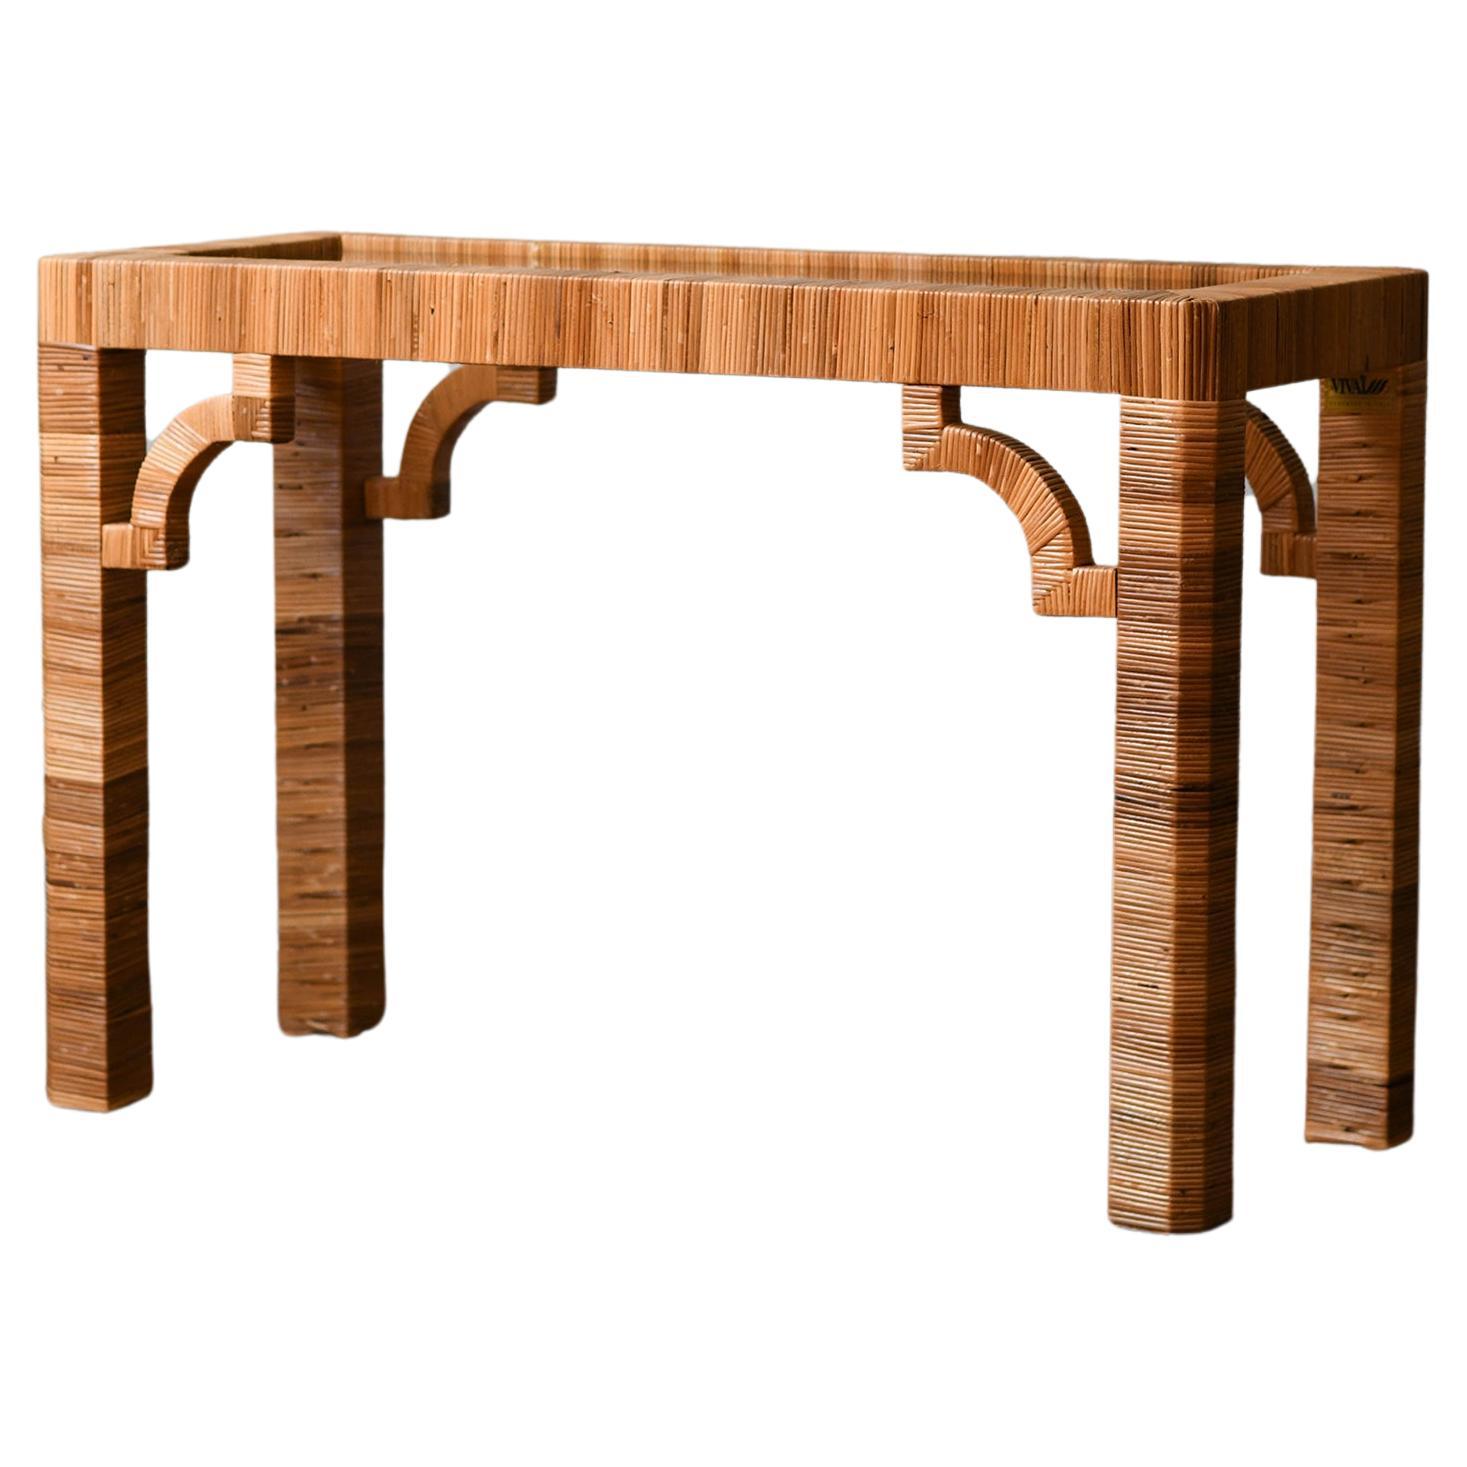 Vivai Del Sud console in rattan with glass shelf, Italy 1970. For Sale